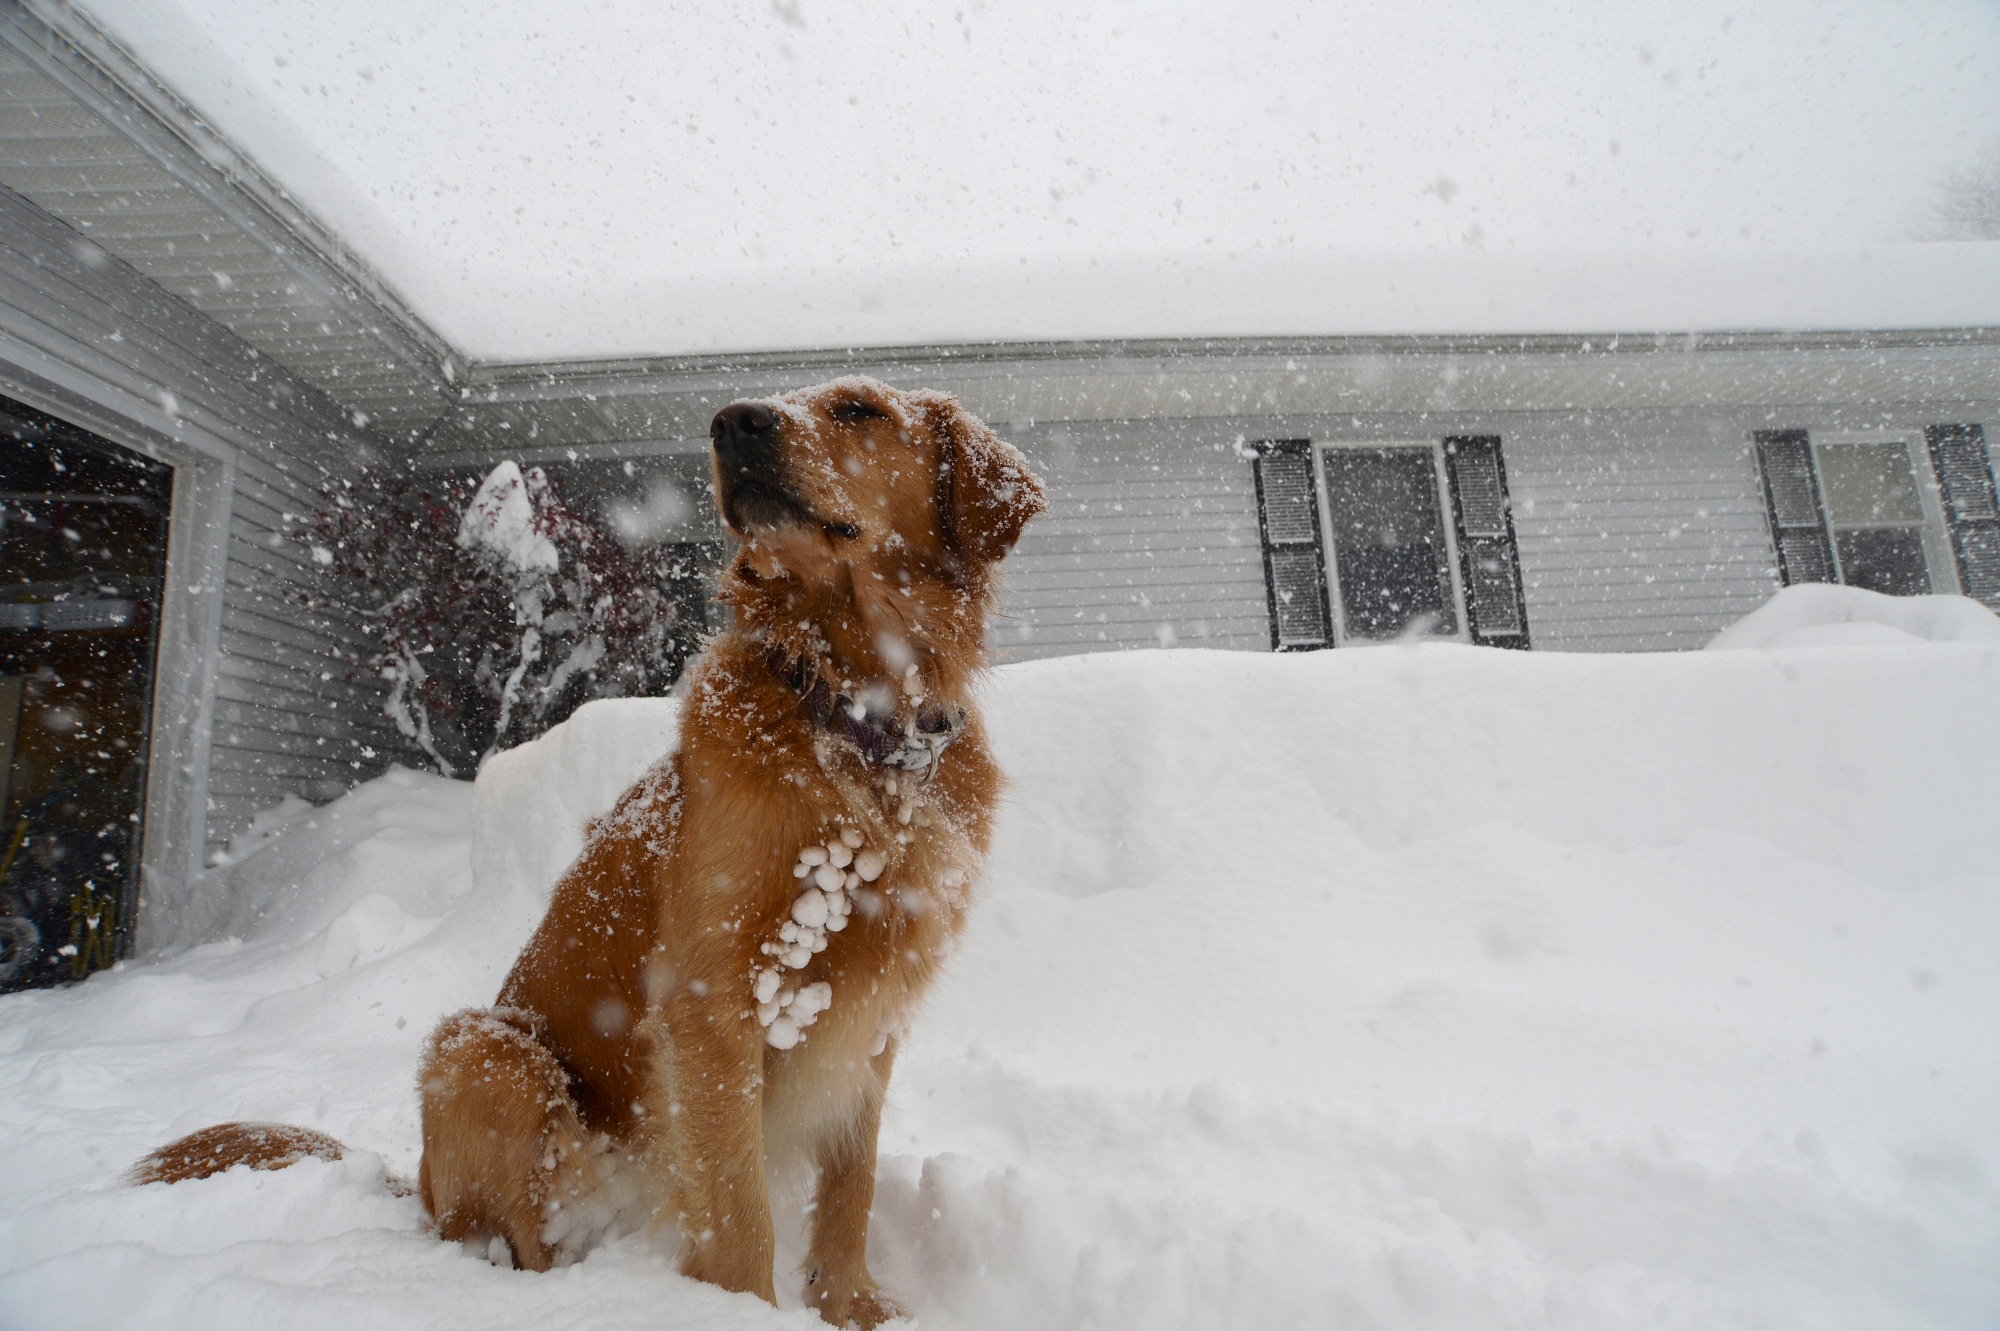 PHOTOS: Record snowstorm buries parts of upstate New York under 6 feet of  snow